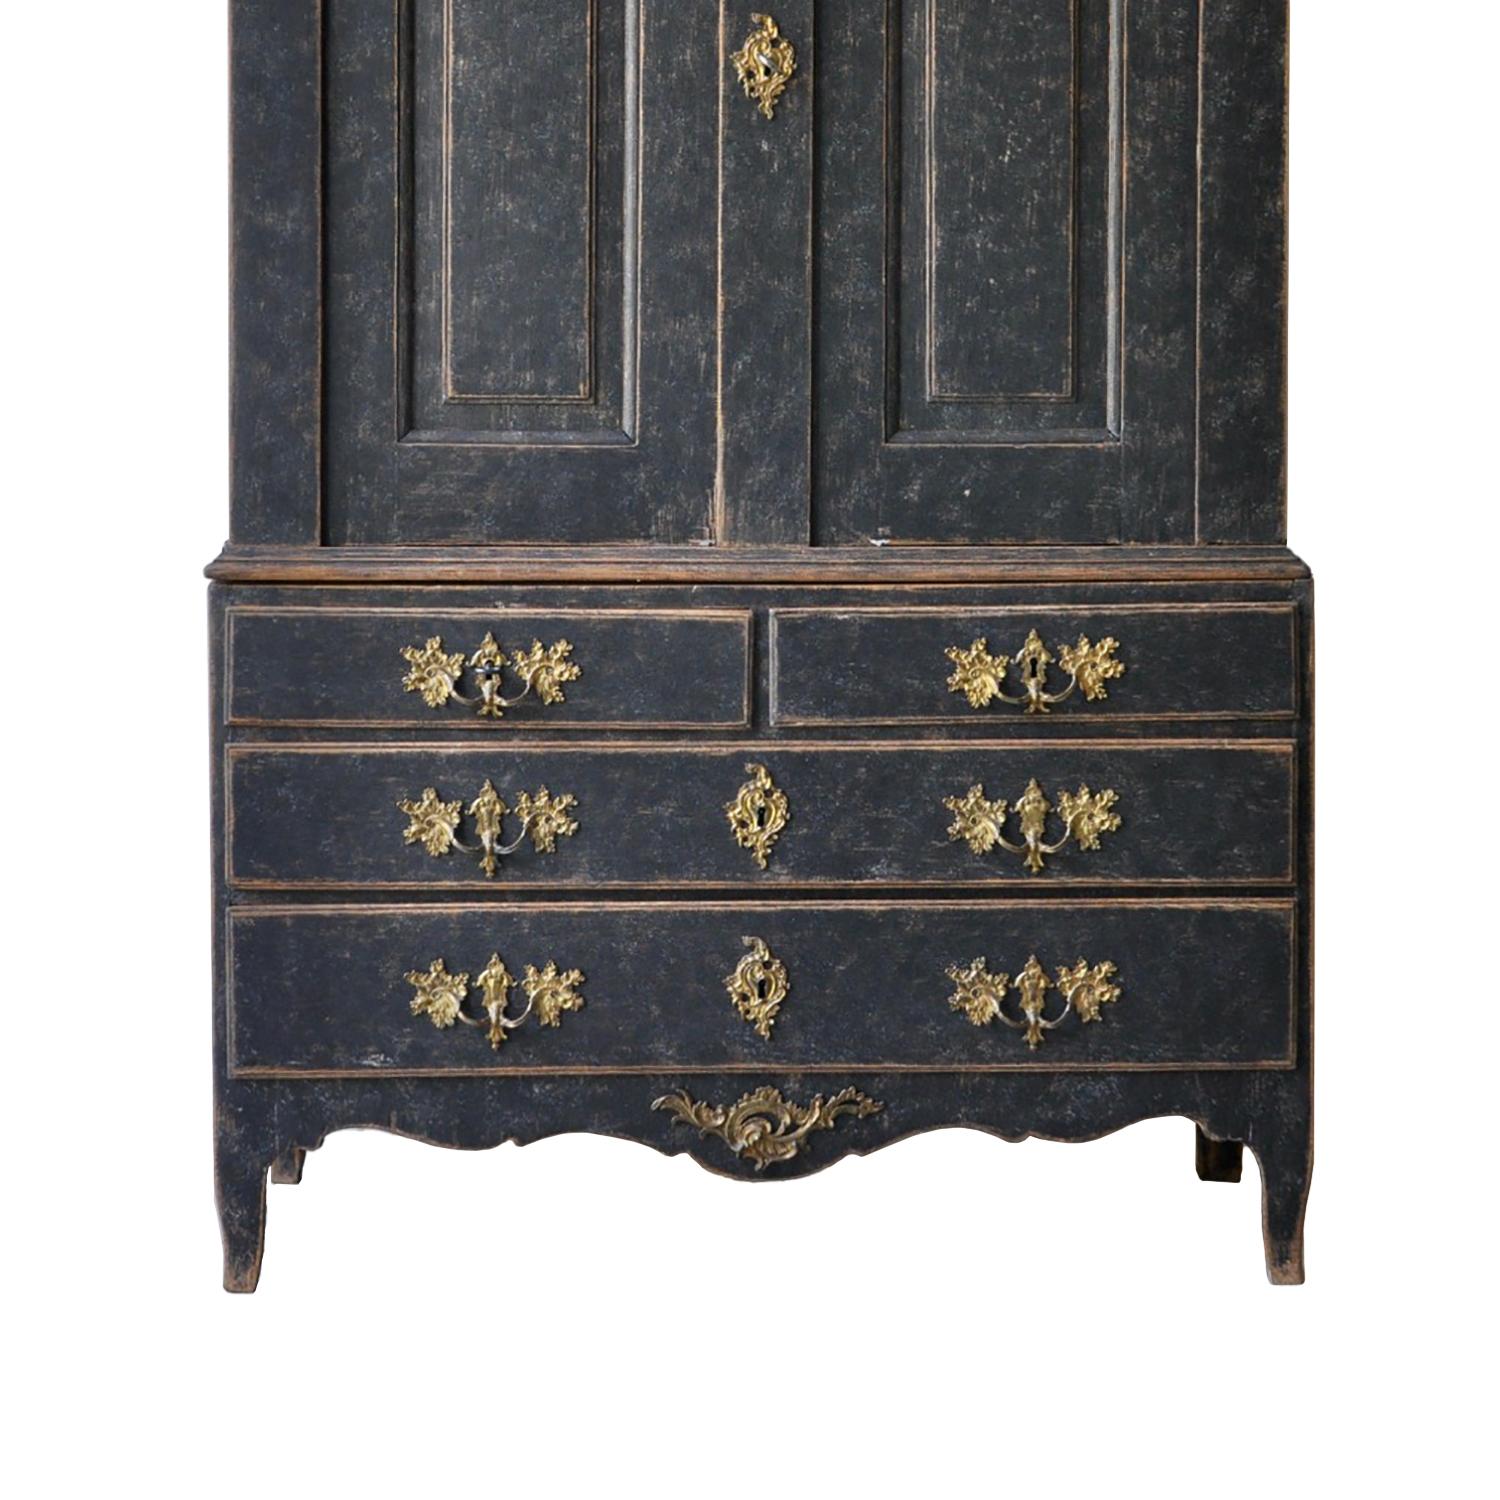 Swedish Baroque Cabinet In Good Condition For Sale In Tetbury, Gloucestershire